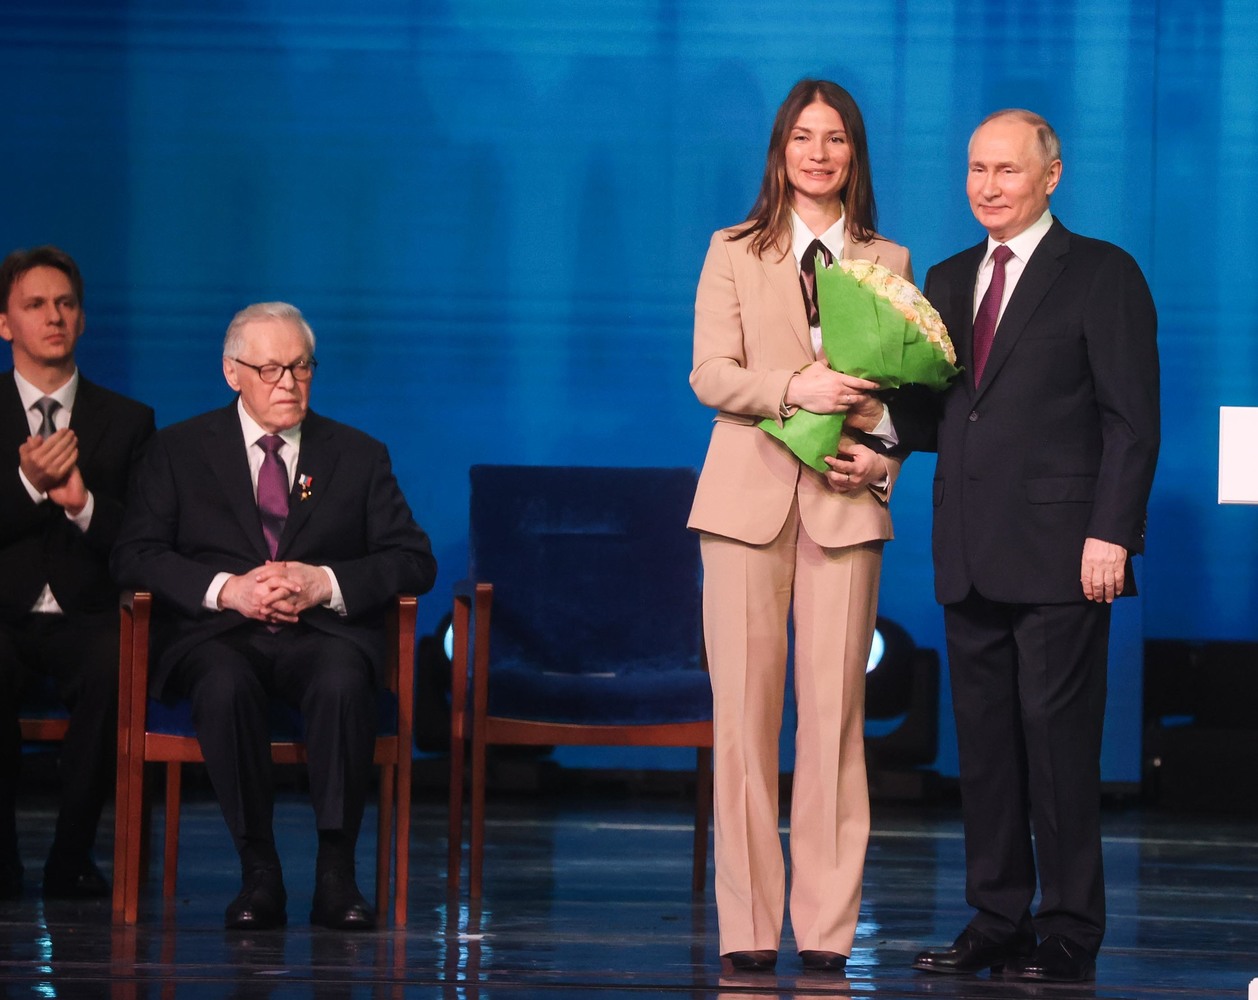 The 300th anniversary of the Russian Academy of Sciences was celebrated at the State Kremlin Palace: Putin presented awards